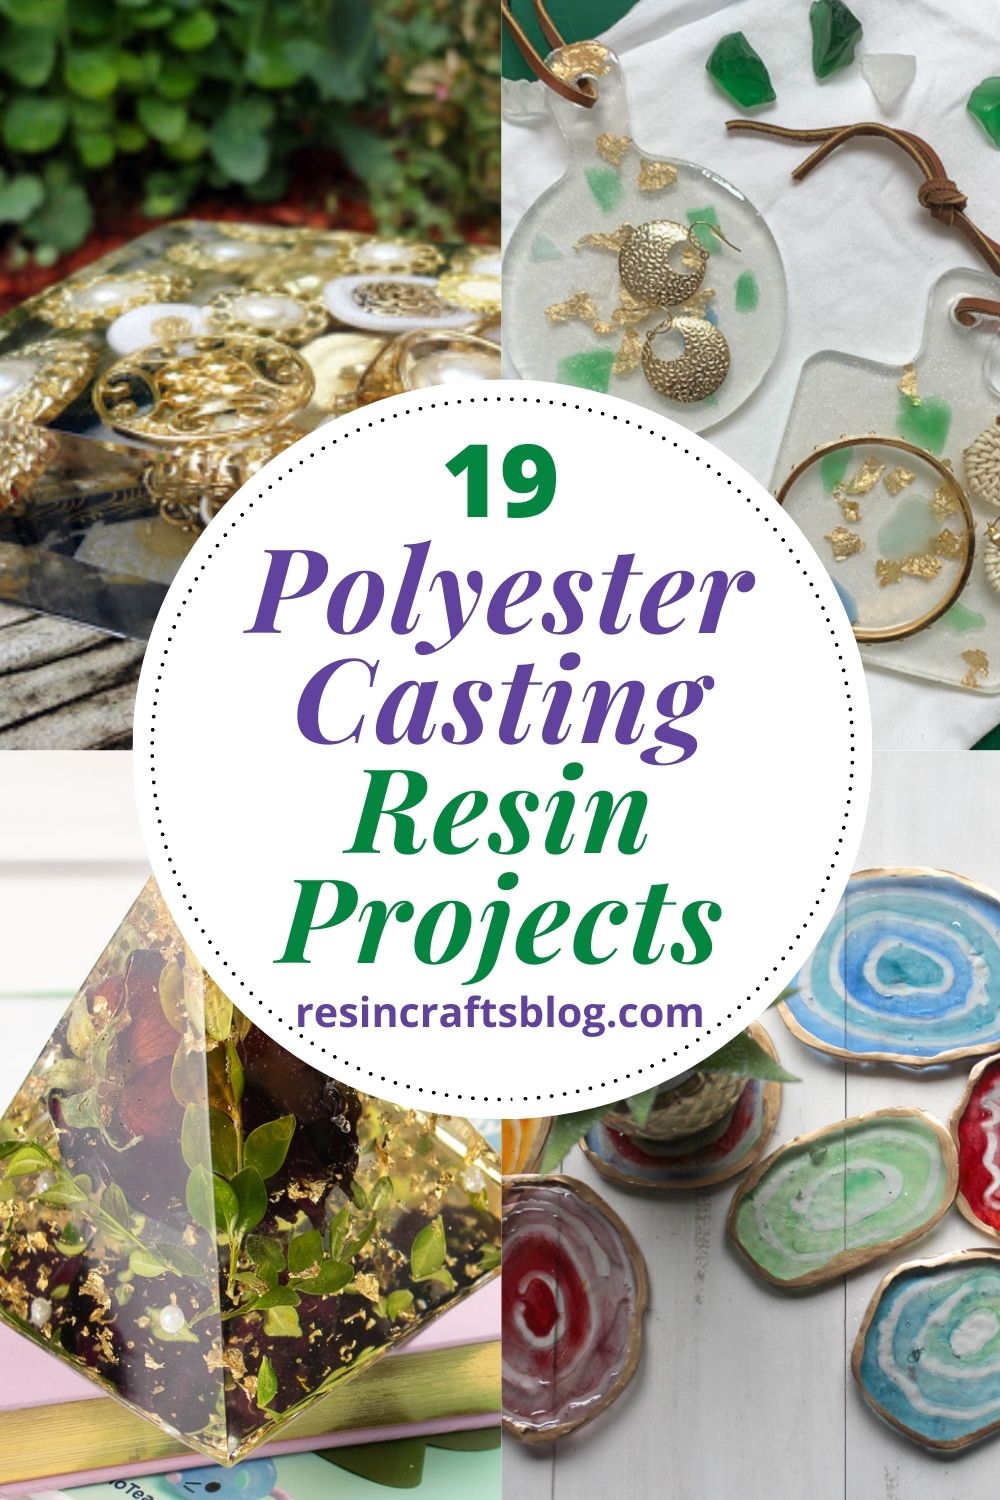 Are you looking for a new resin crafting project? How about something with a little sparkle and shine? Polyester casting resin is perfect for creating beautiful pieces that add interest to any room. #resincraftsblog #polyestercastingresin #resinprojects #madewithETI via @resincraftsblog